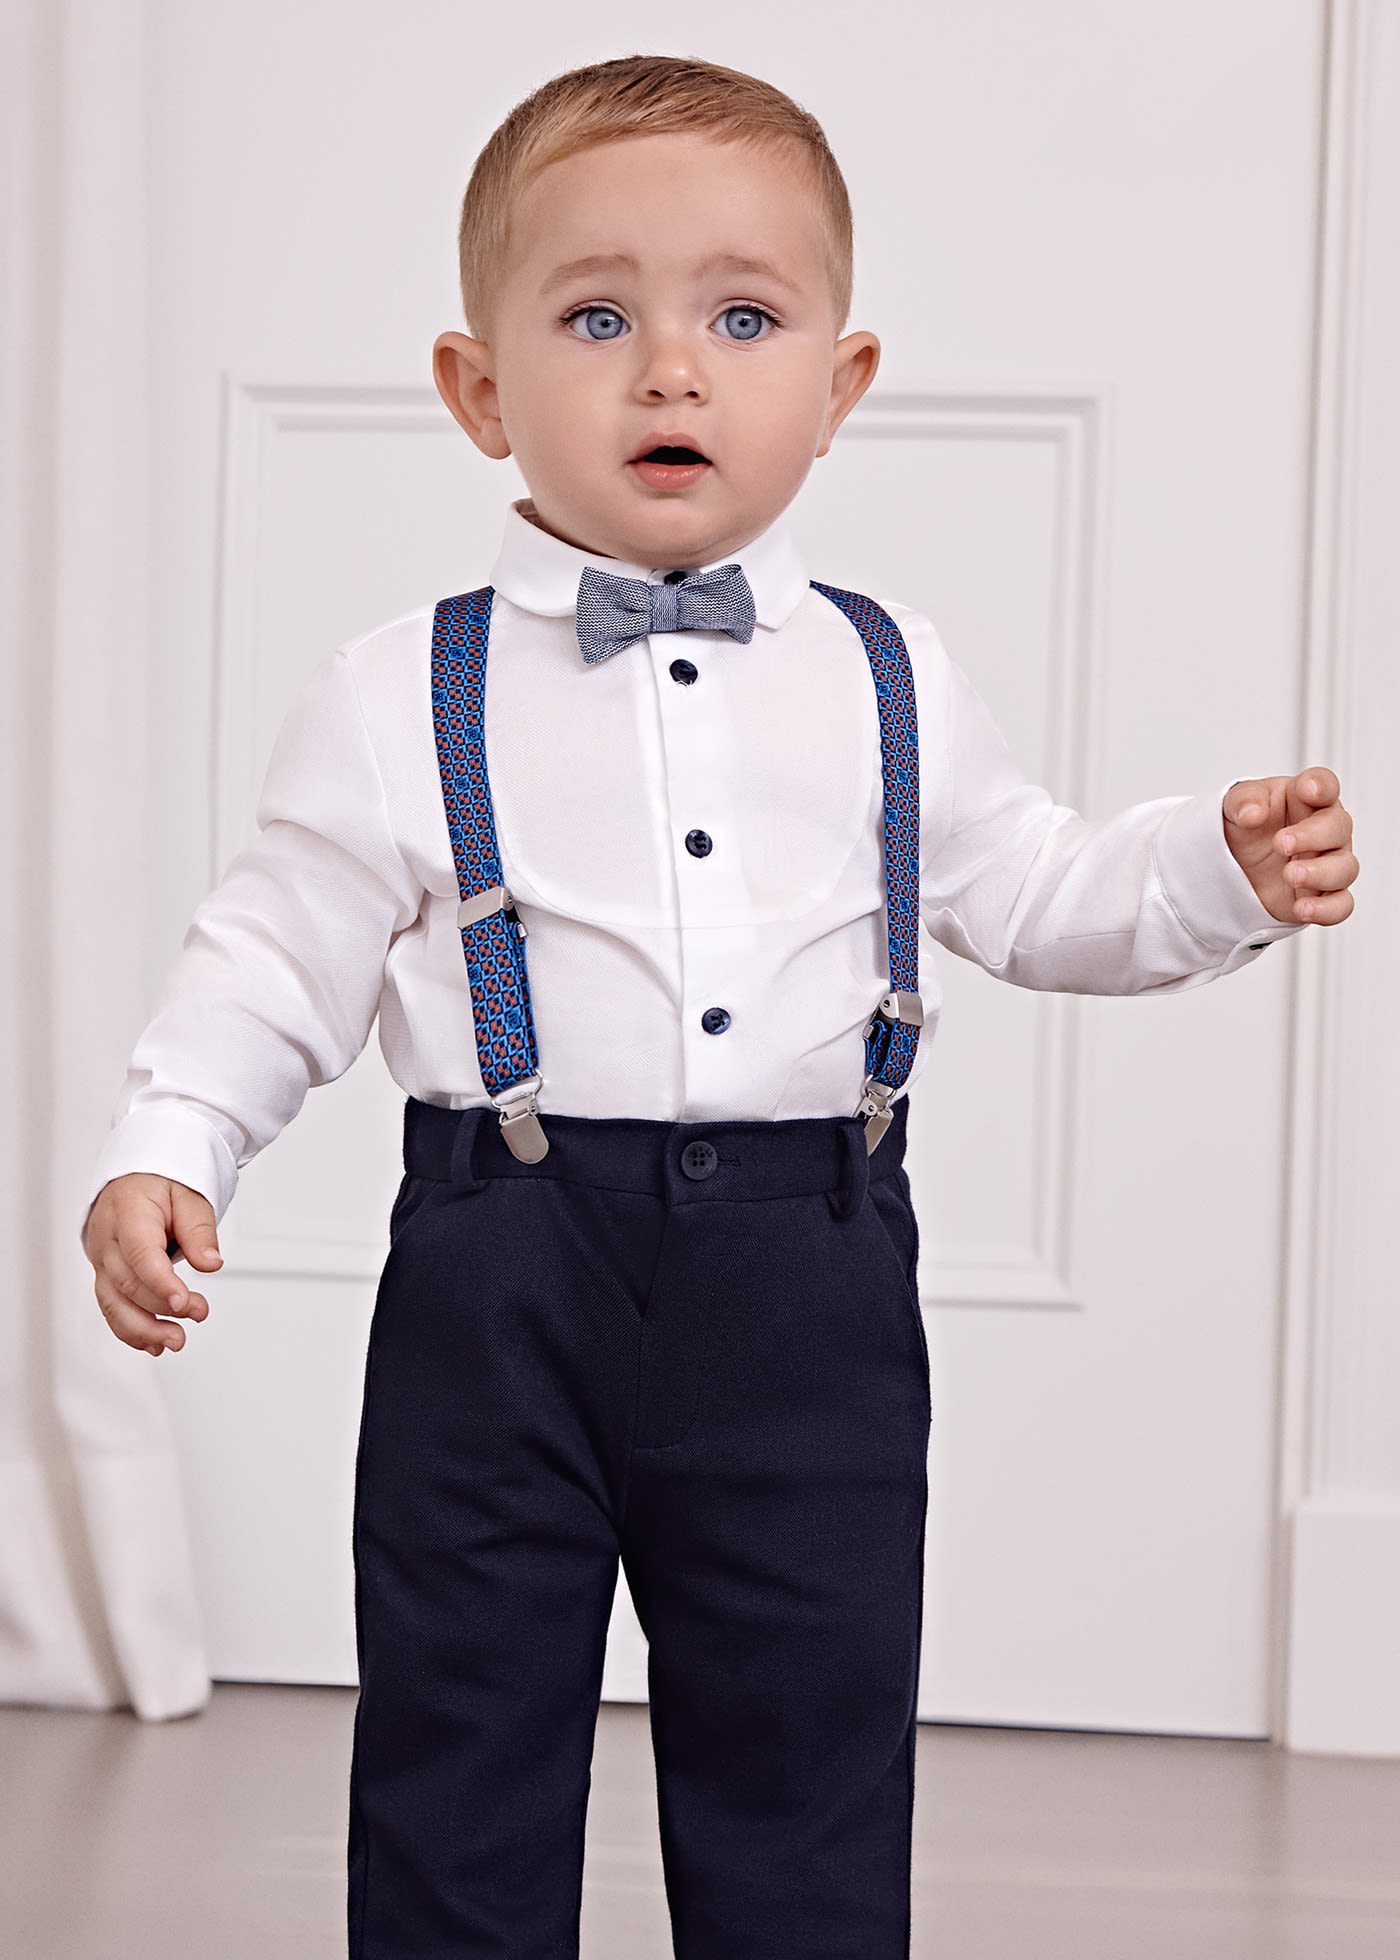 Baby Shirt with Bow Tie